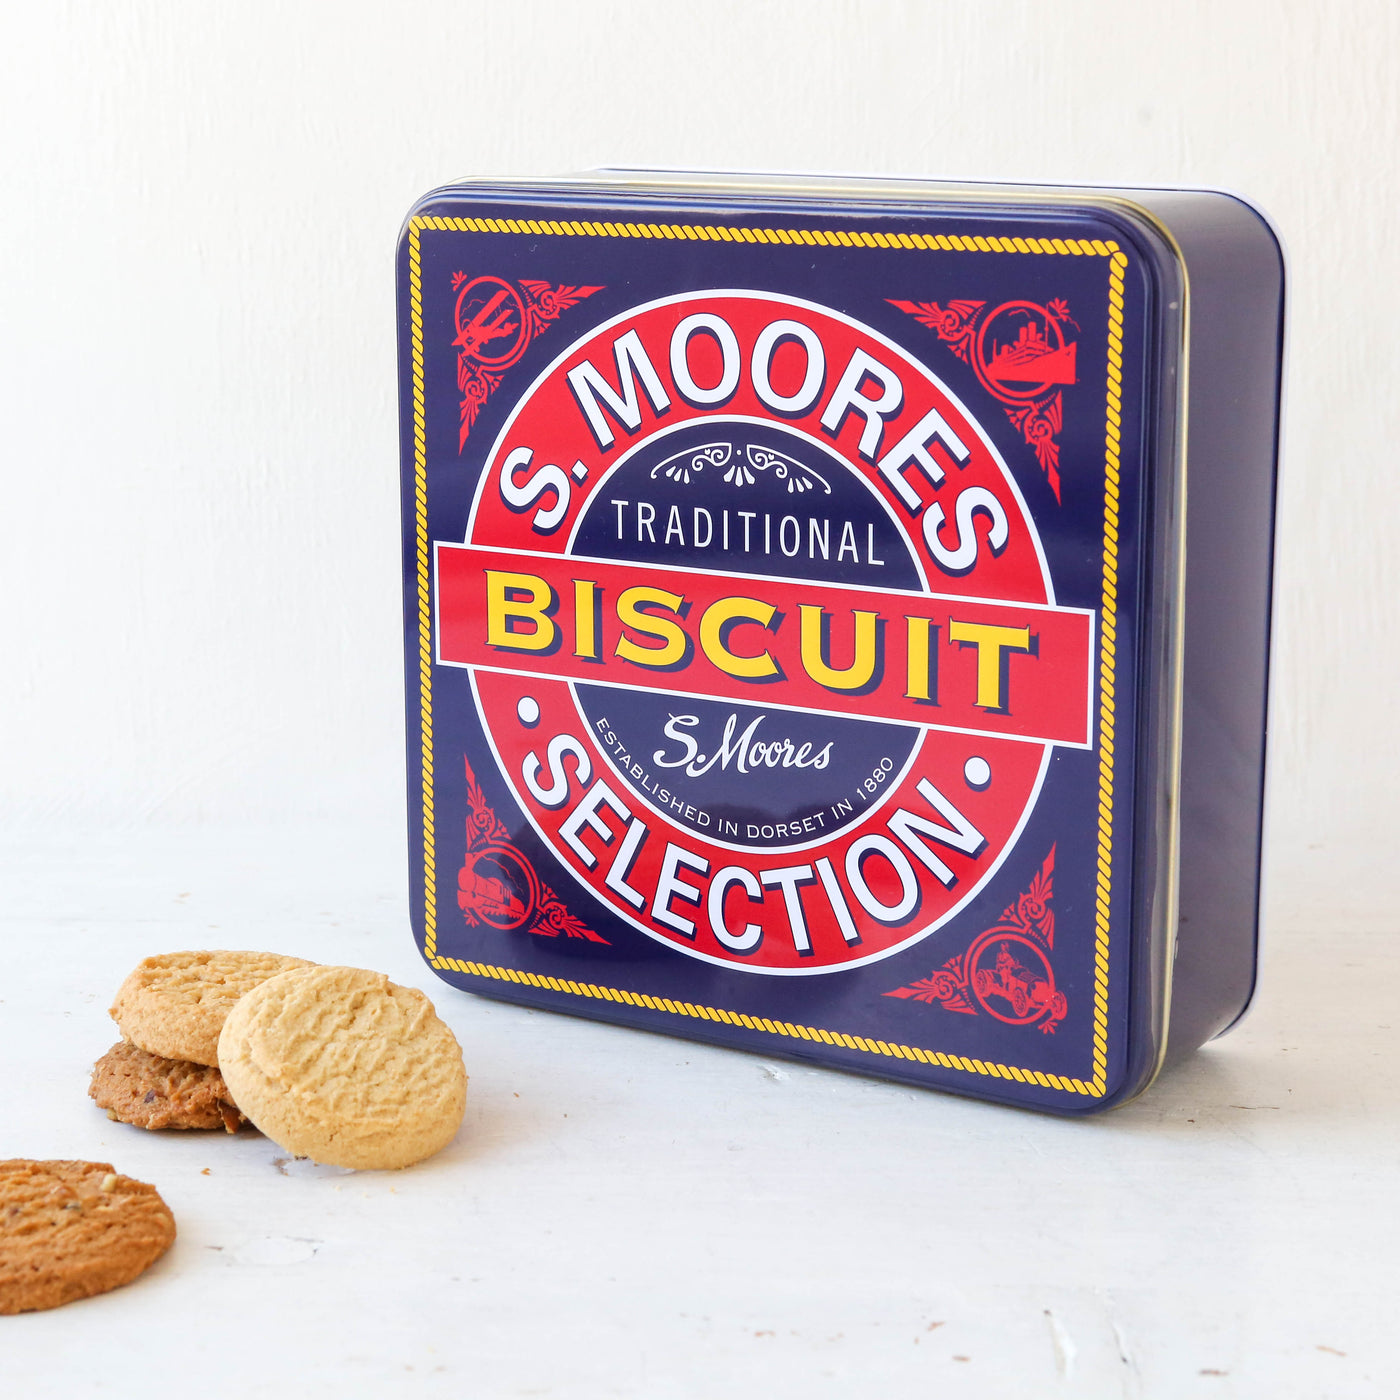 Moores Traditional Tinned Biscuit Selection - 400g